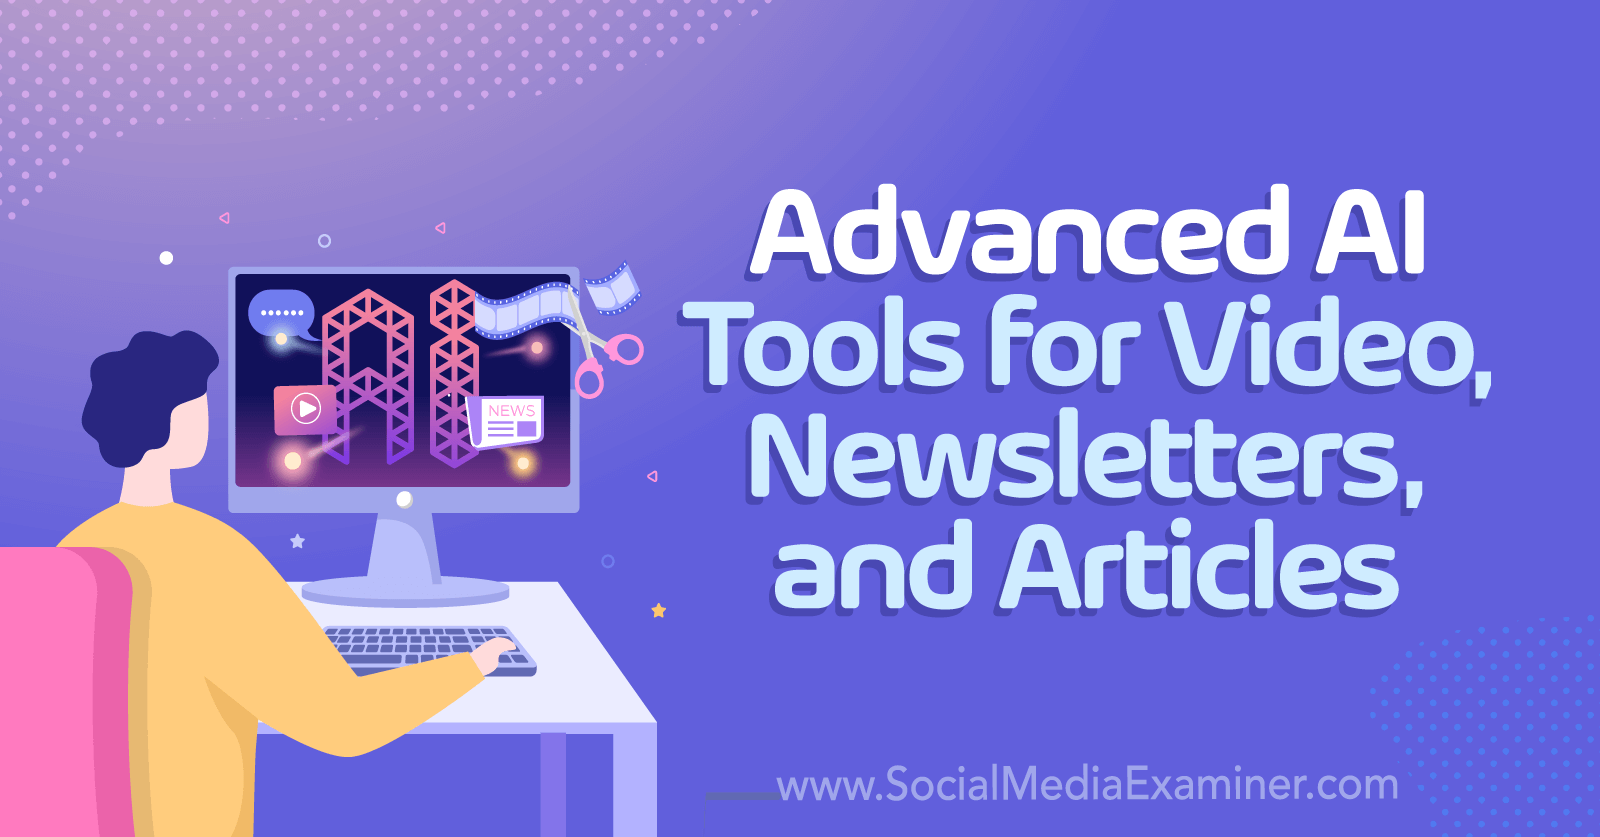 Advanced AI Tools for Video, Newsletters, and Articles by Social Media Examiner